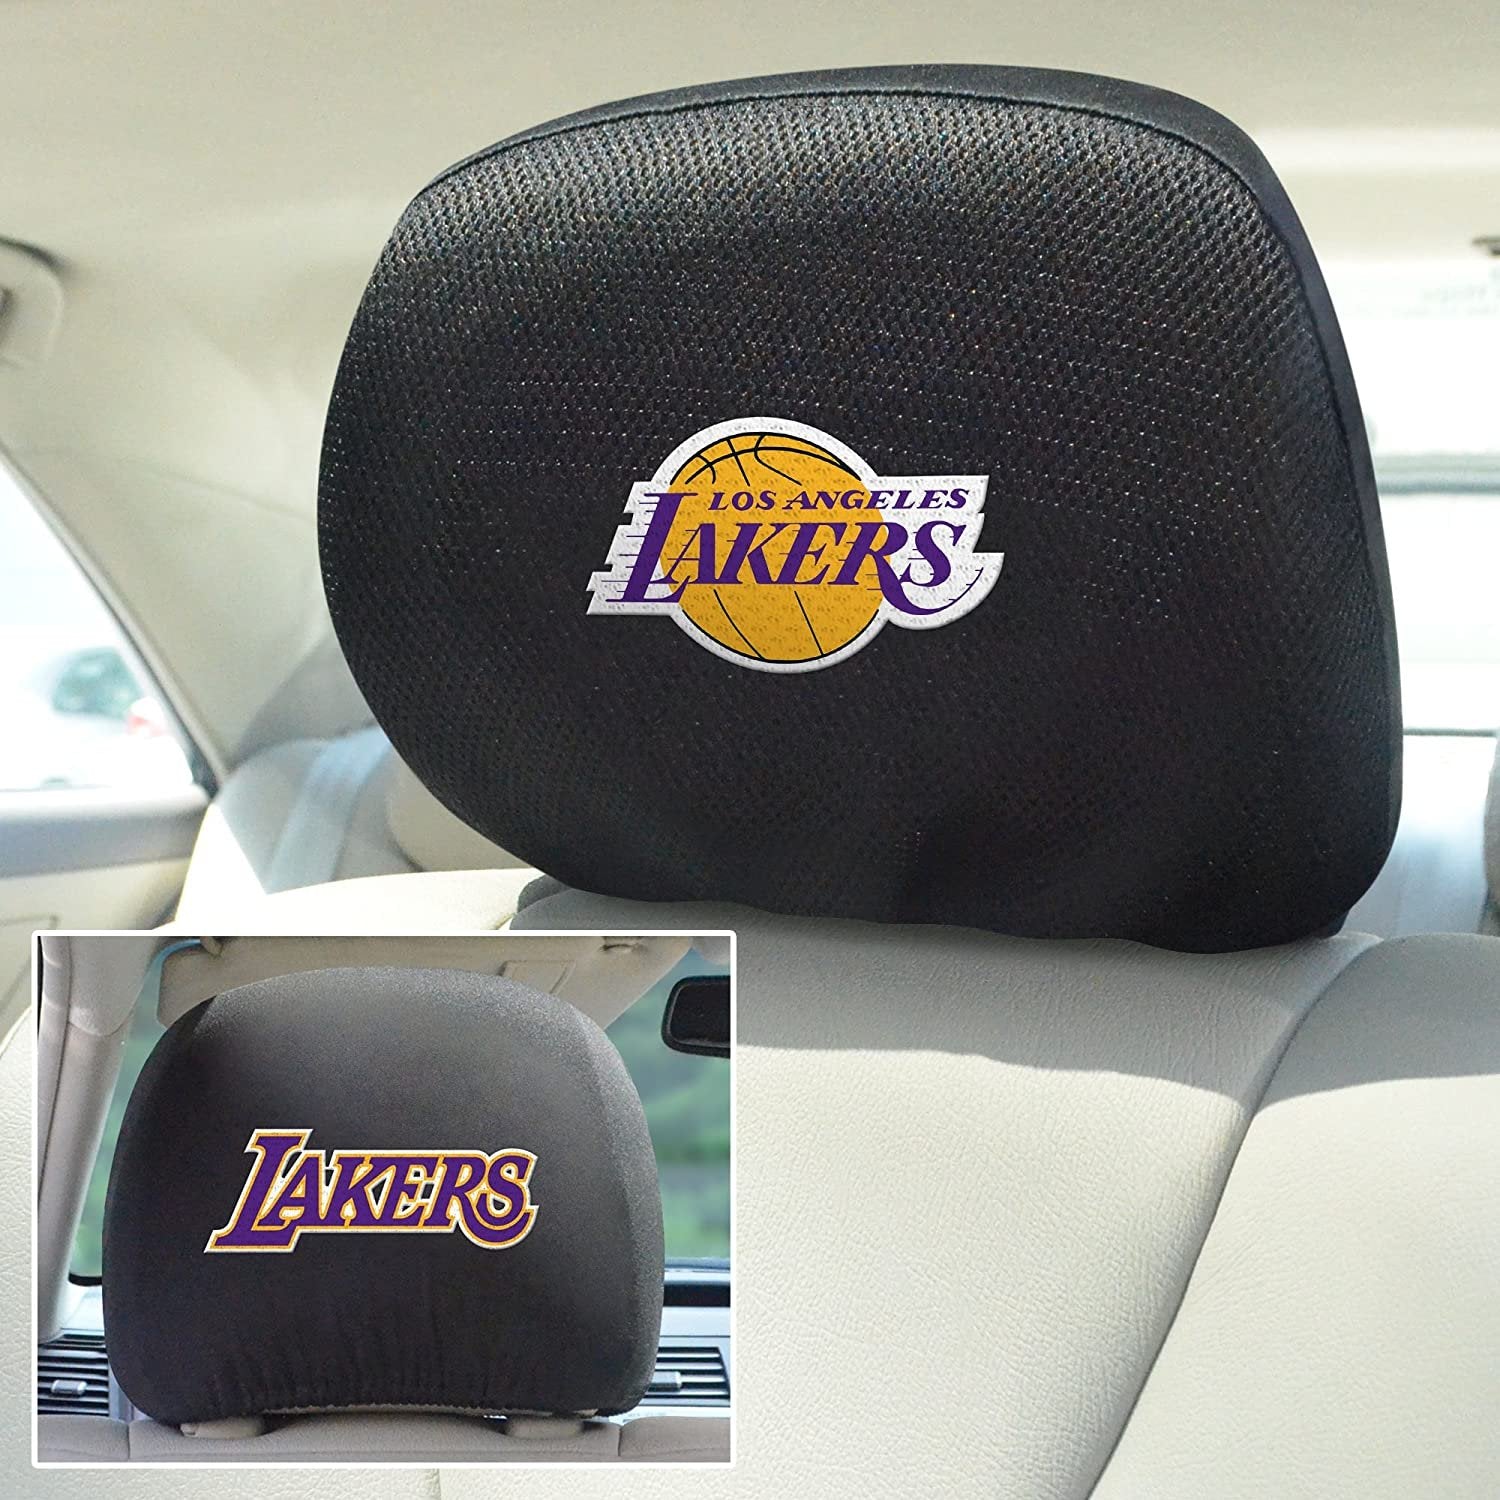 Los Angeles Lakers Pair of Premium Auto Head Rest Covers, Embroidered, Black Elastic, 14x10 Inch